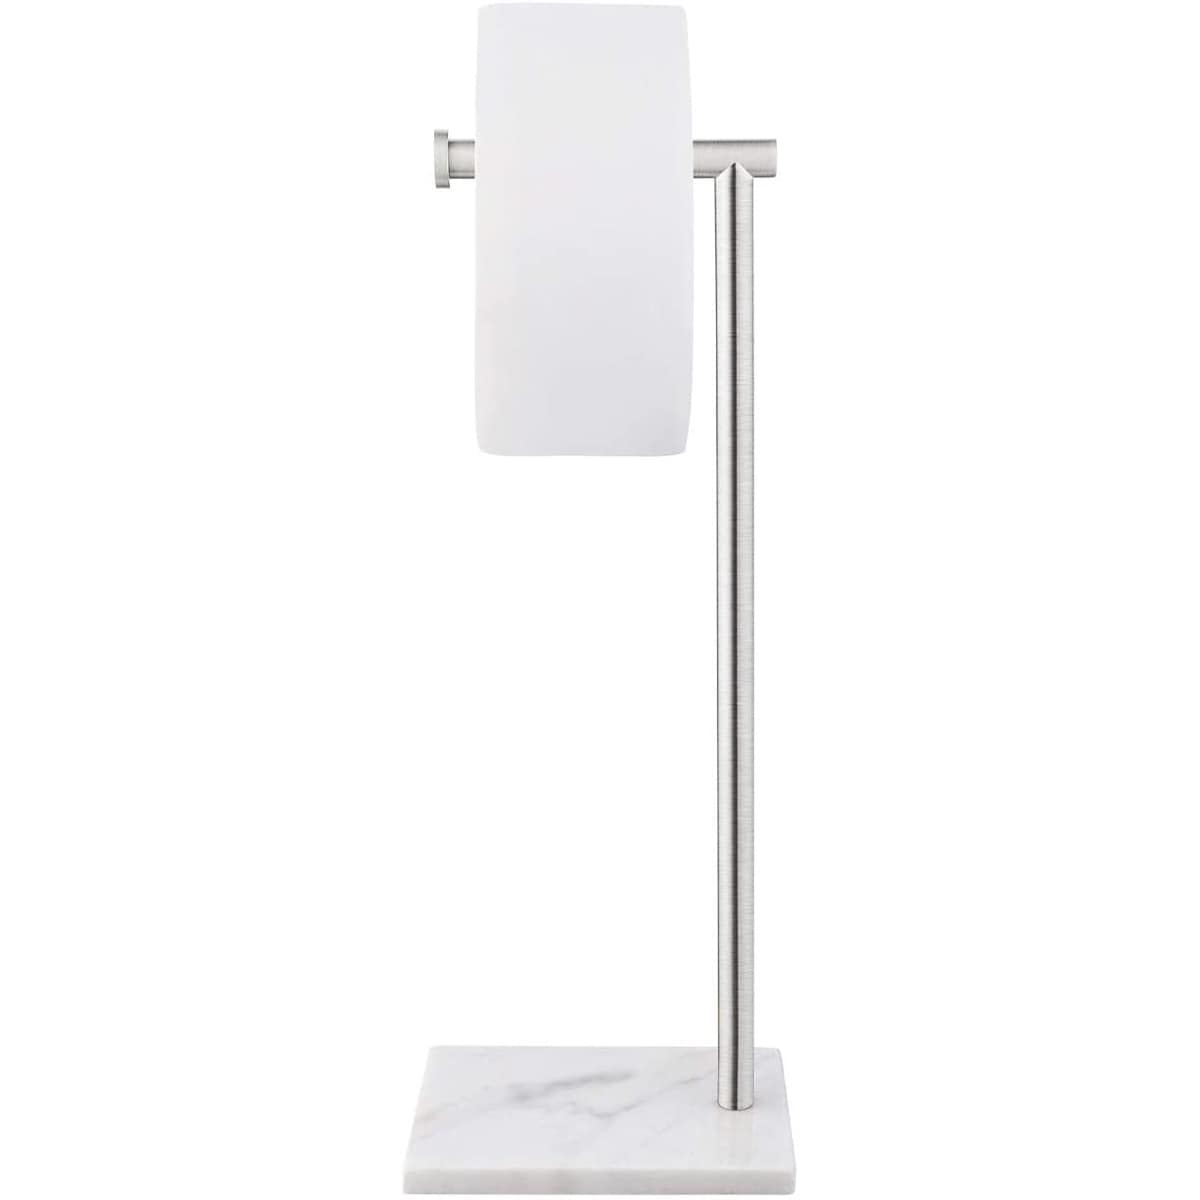 https://ak1.ostkcdn.com/images/products/is/images/direct/a160a8113ddbab563bb91a6d815aa8eb472fcfbb/FreestandingToilet-Paper-Holder-with-Marble-Base.jpg